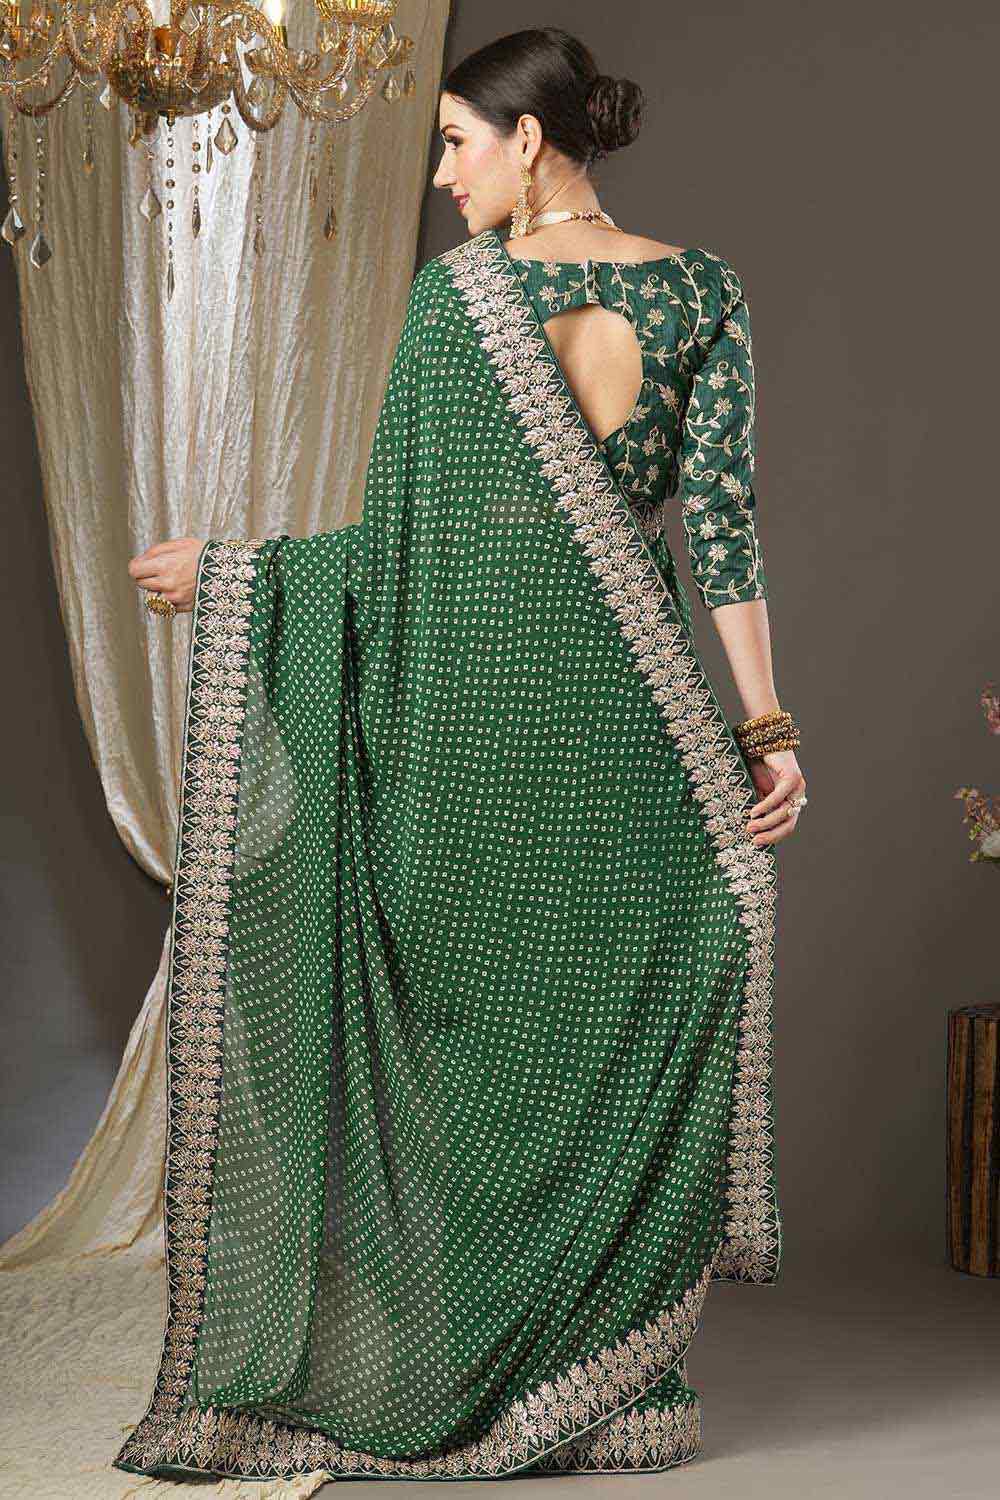 Shop Hillary Green Georgette Zari Embroidered Bandhani One Minute Saree at best offer at our  Store - One Minute Saree